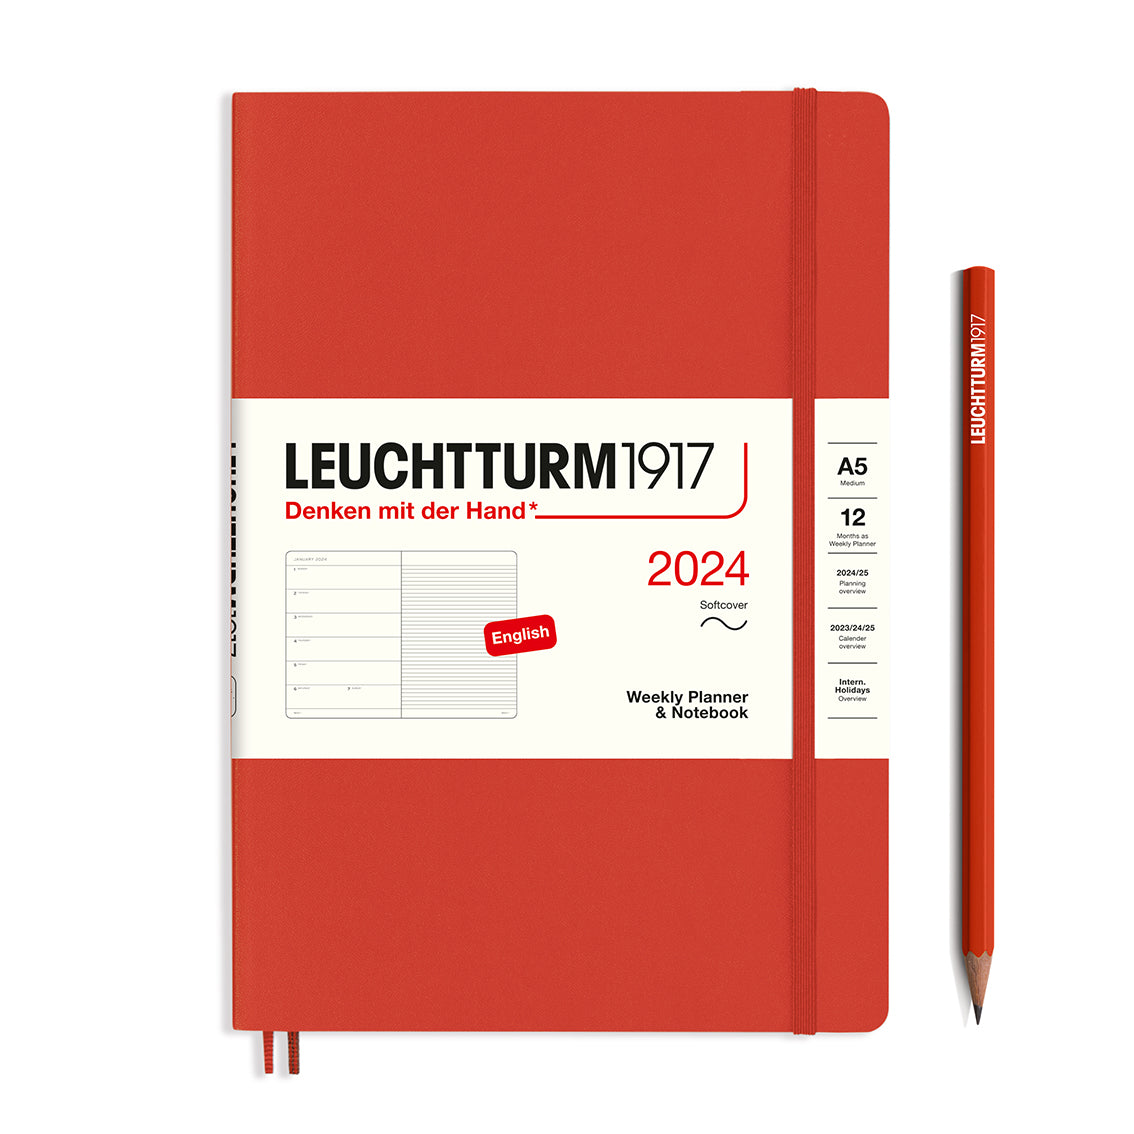 An image of an orangey/red planner with an orangey/red elastic band holding it together and a cream paper wrap around the middle stating the business name Leuchtturm1917, that it is for the year 2024, it is a weekly planner and notebook, is A5 in size and an English language version. It has an image on the wrap showing the inside layout which is a week on the left hand page and a notes page on thr right hand page. An orangey/red pencil is shown at the side of the planner.